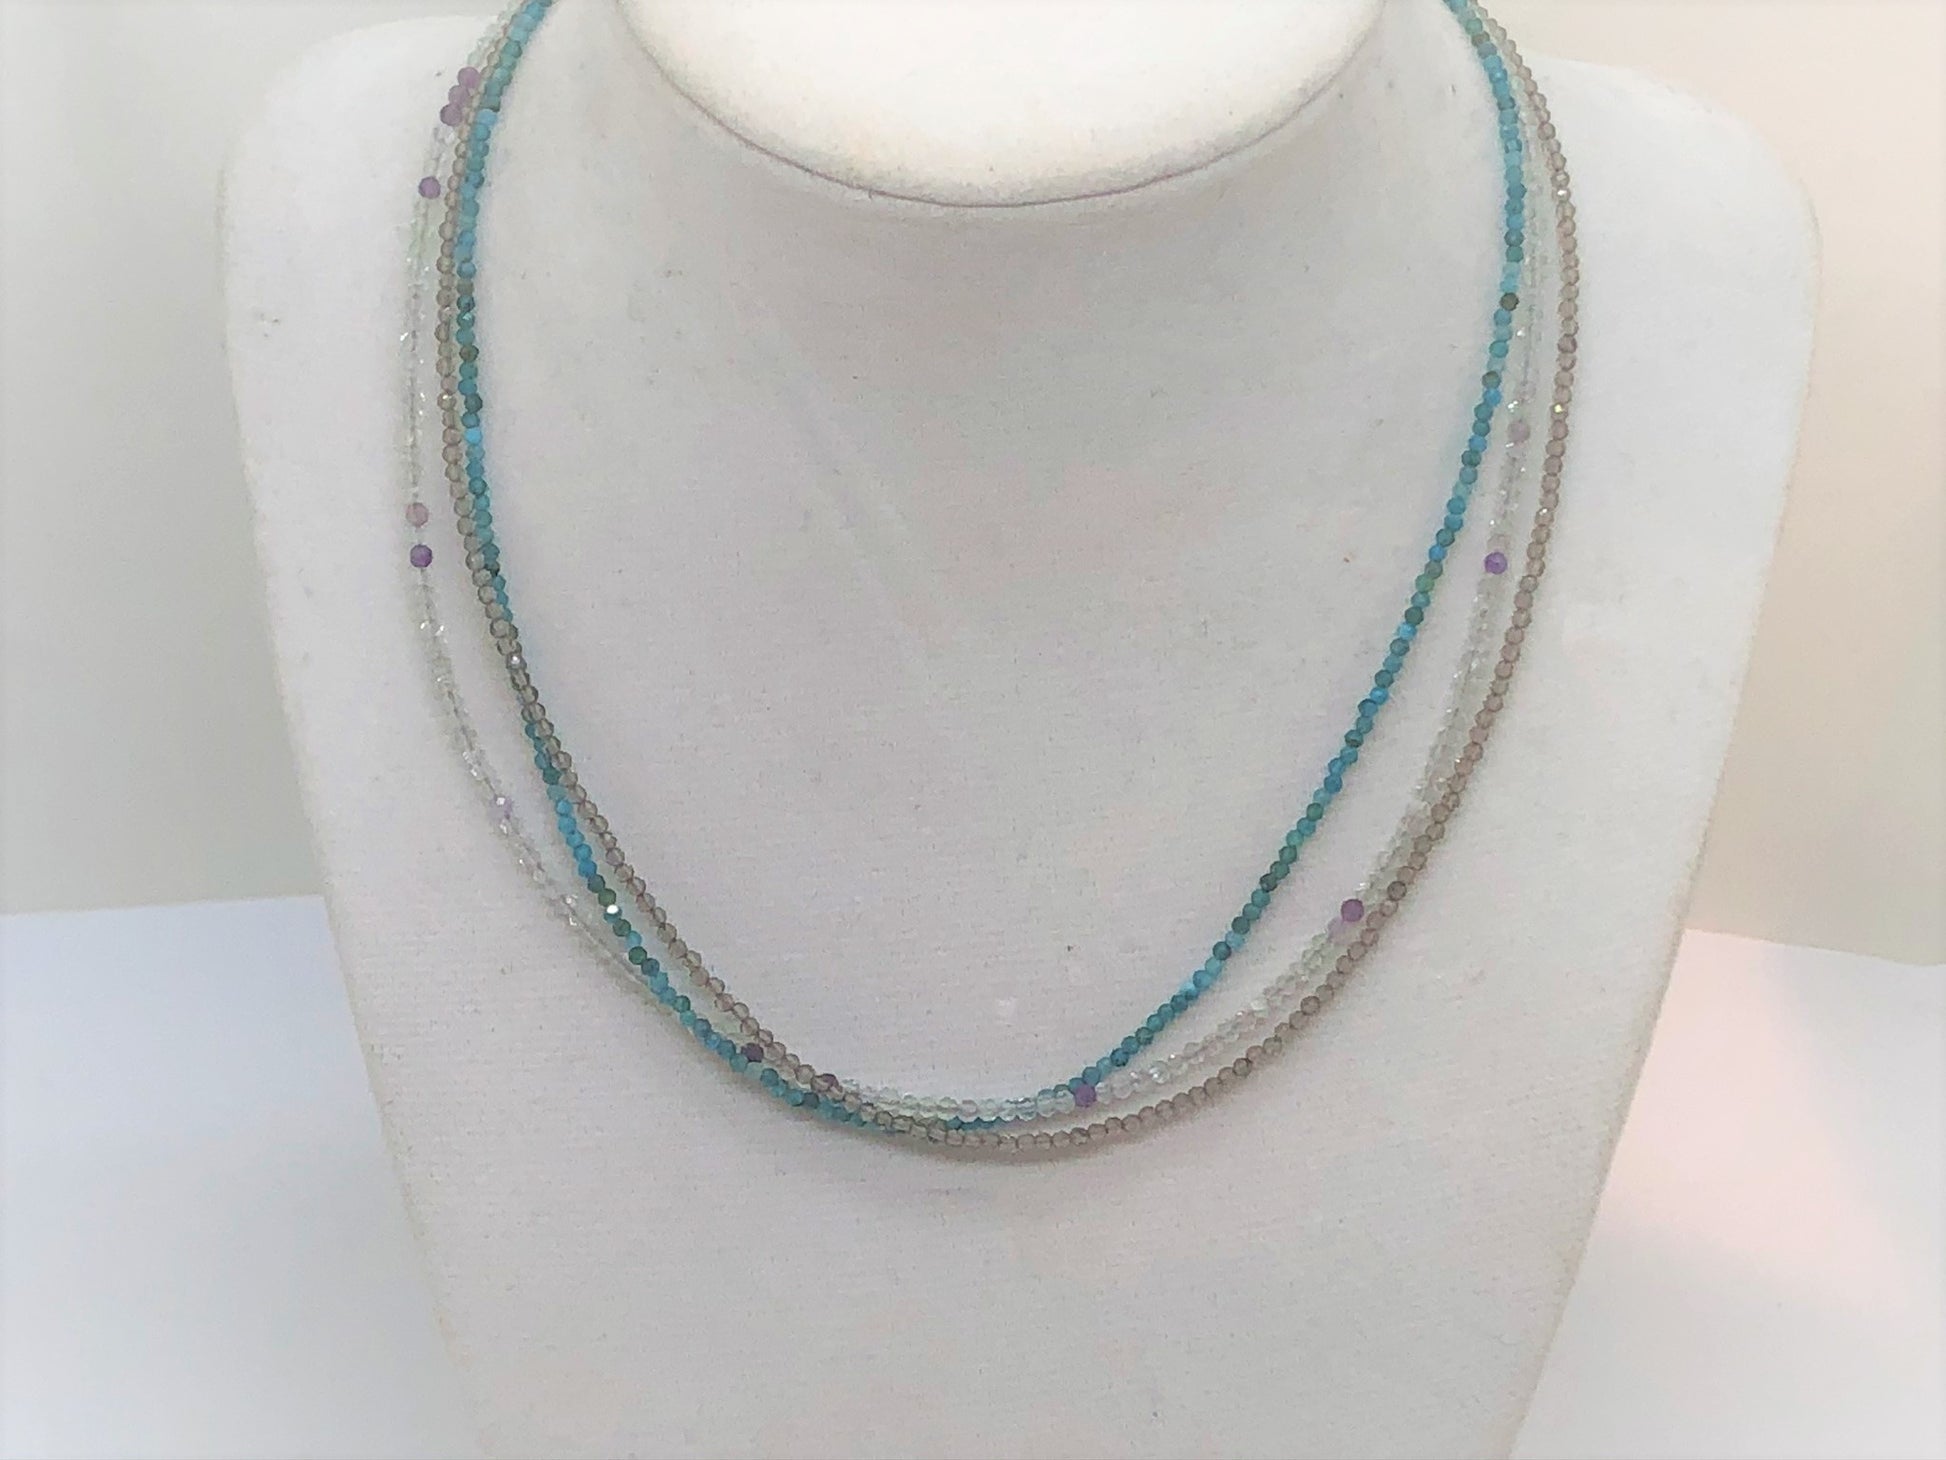 Triple Gemstone Short Necklace with Fluorite, Apatite and Chalcedony - Emmis Jewelry, Necklace, [product_color]